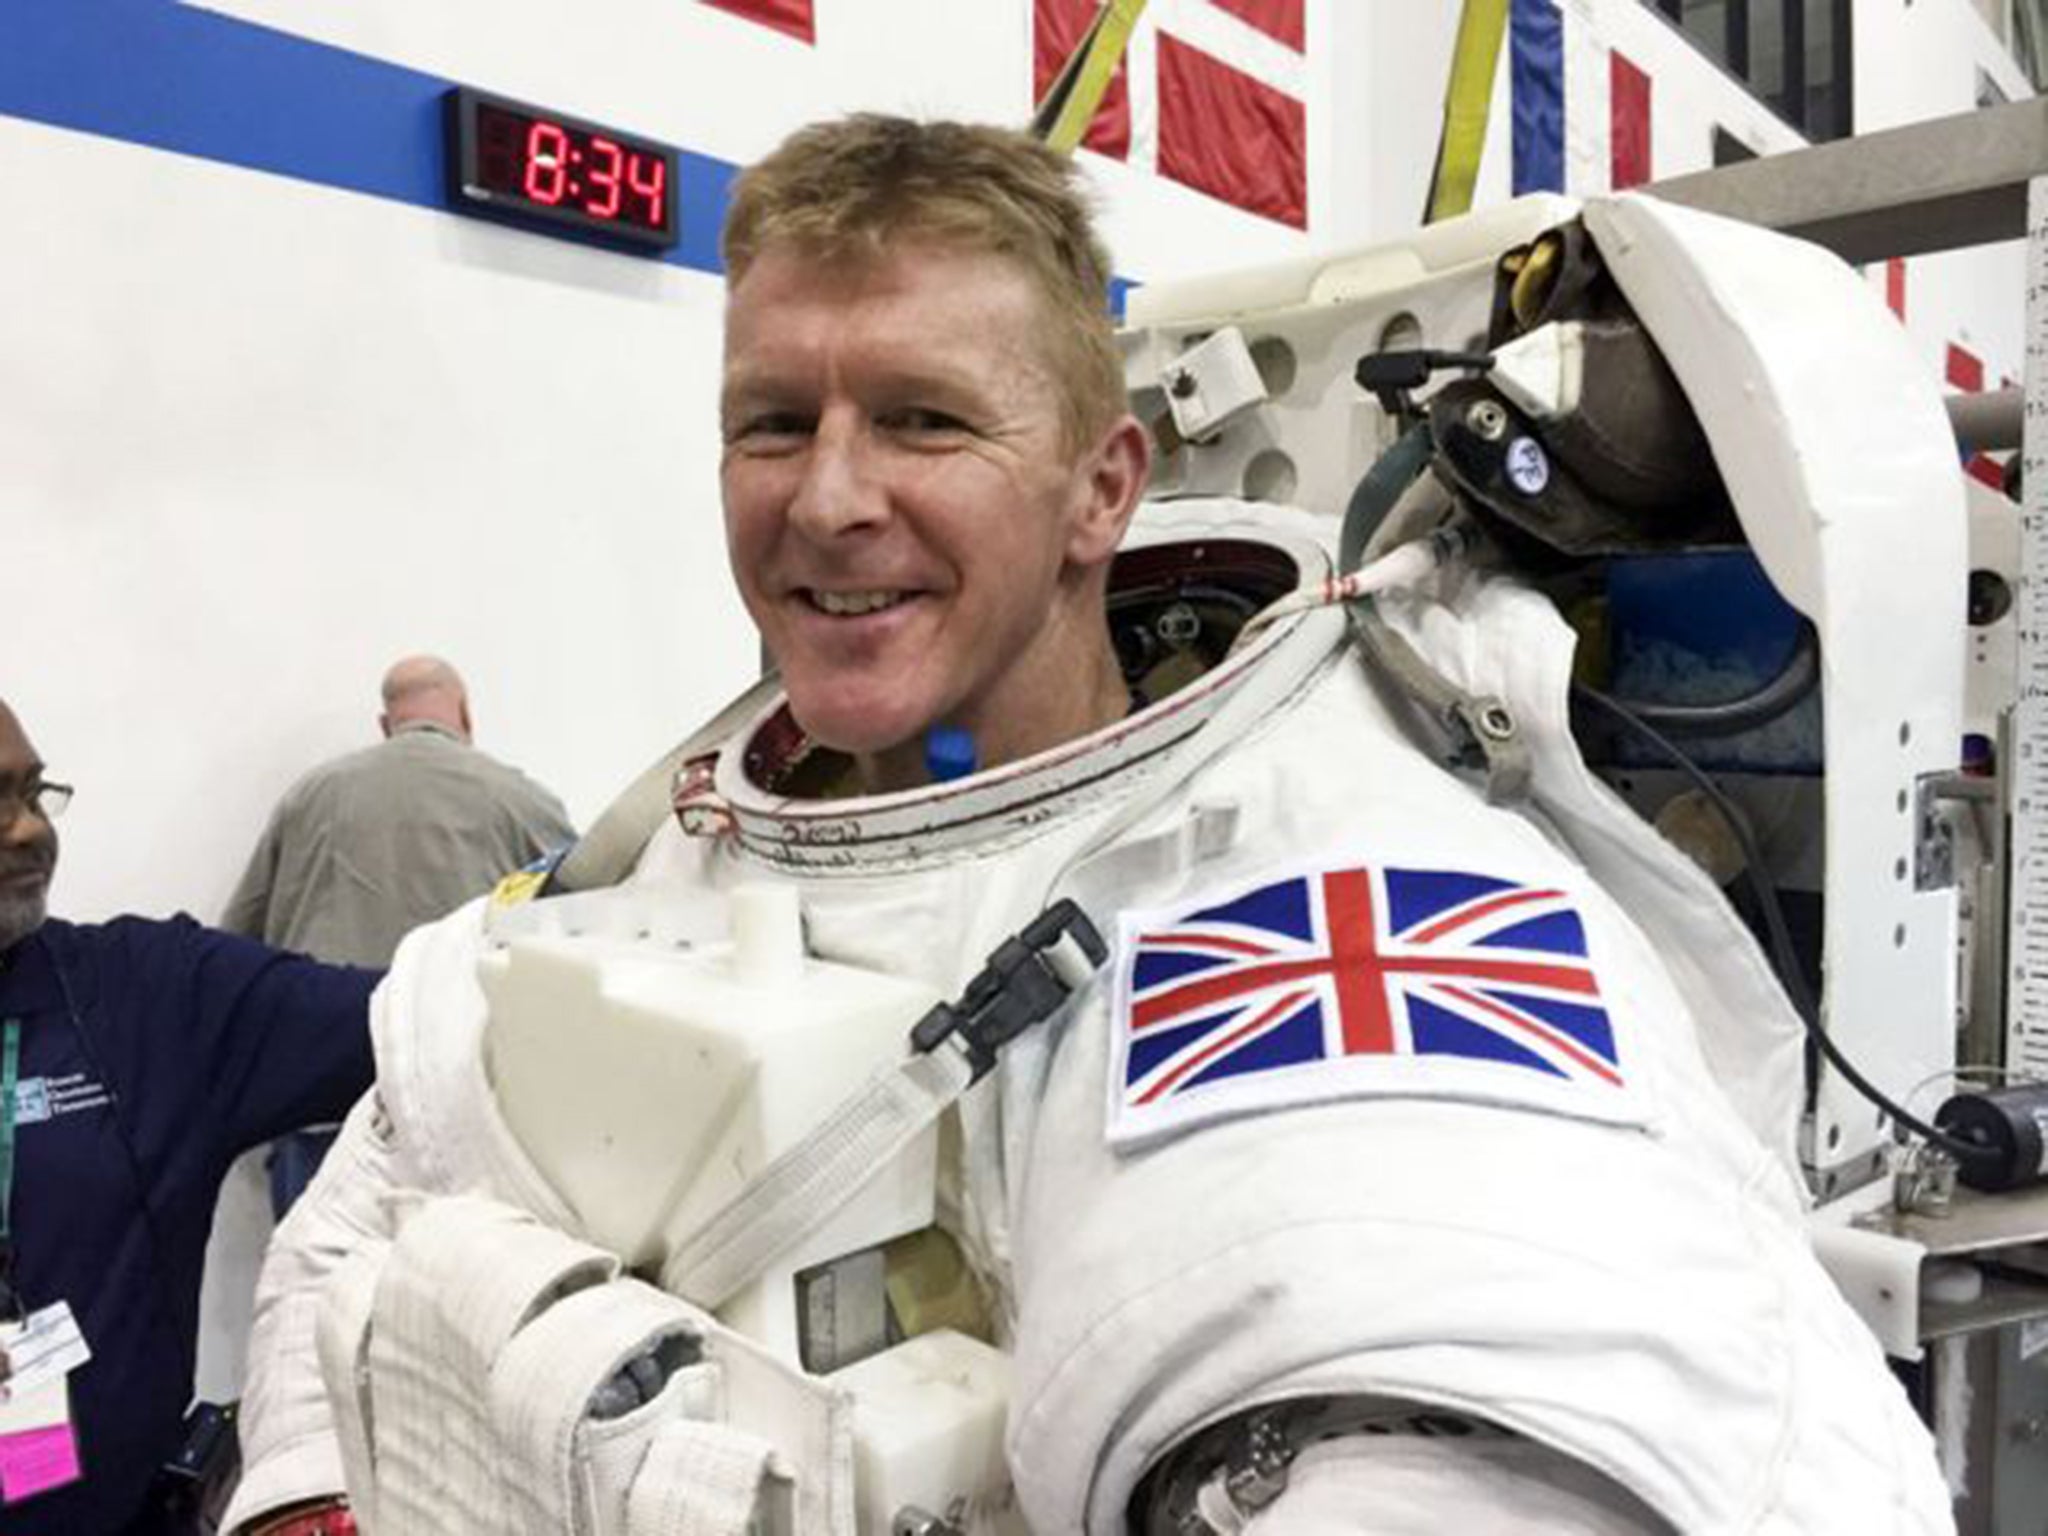 &#13;
Ground control to Major Tim: Peake will lift off from Kazakhstan tomorrow en route to the International Space Station&#13;